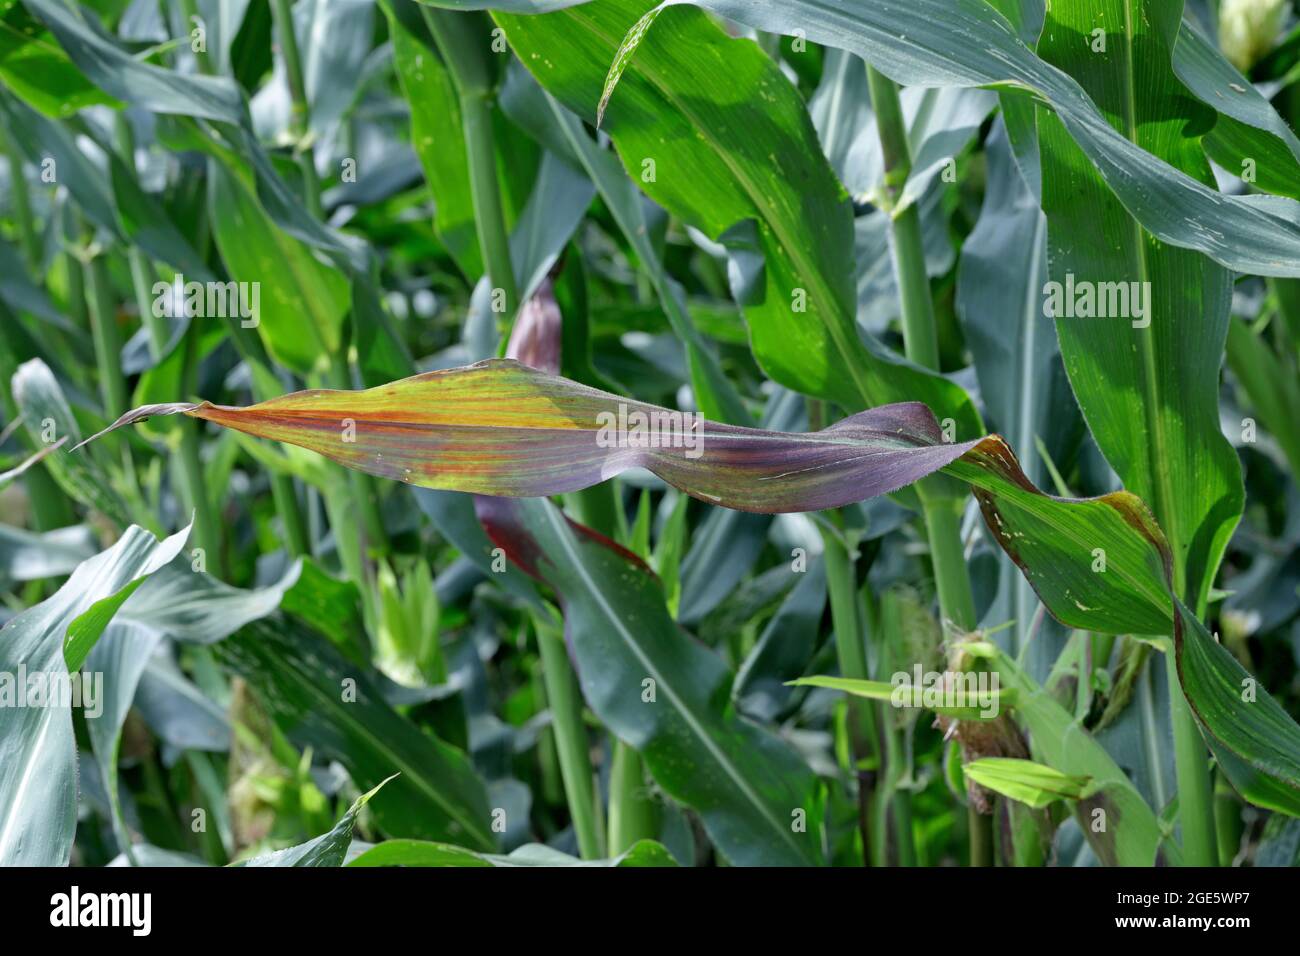 Red discoloration of corn leaves due to nutrient deficiencies or disease caused by viruses. Stock Photo